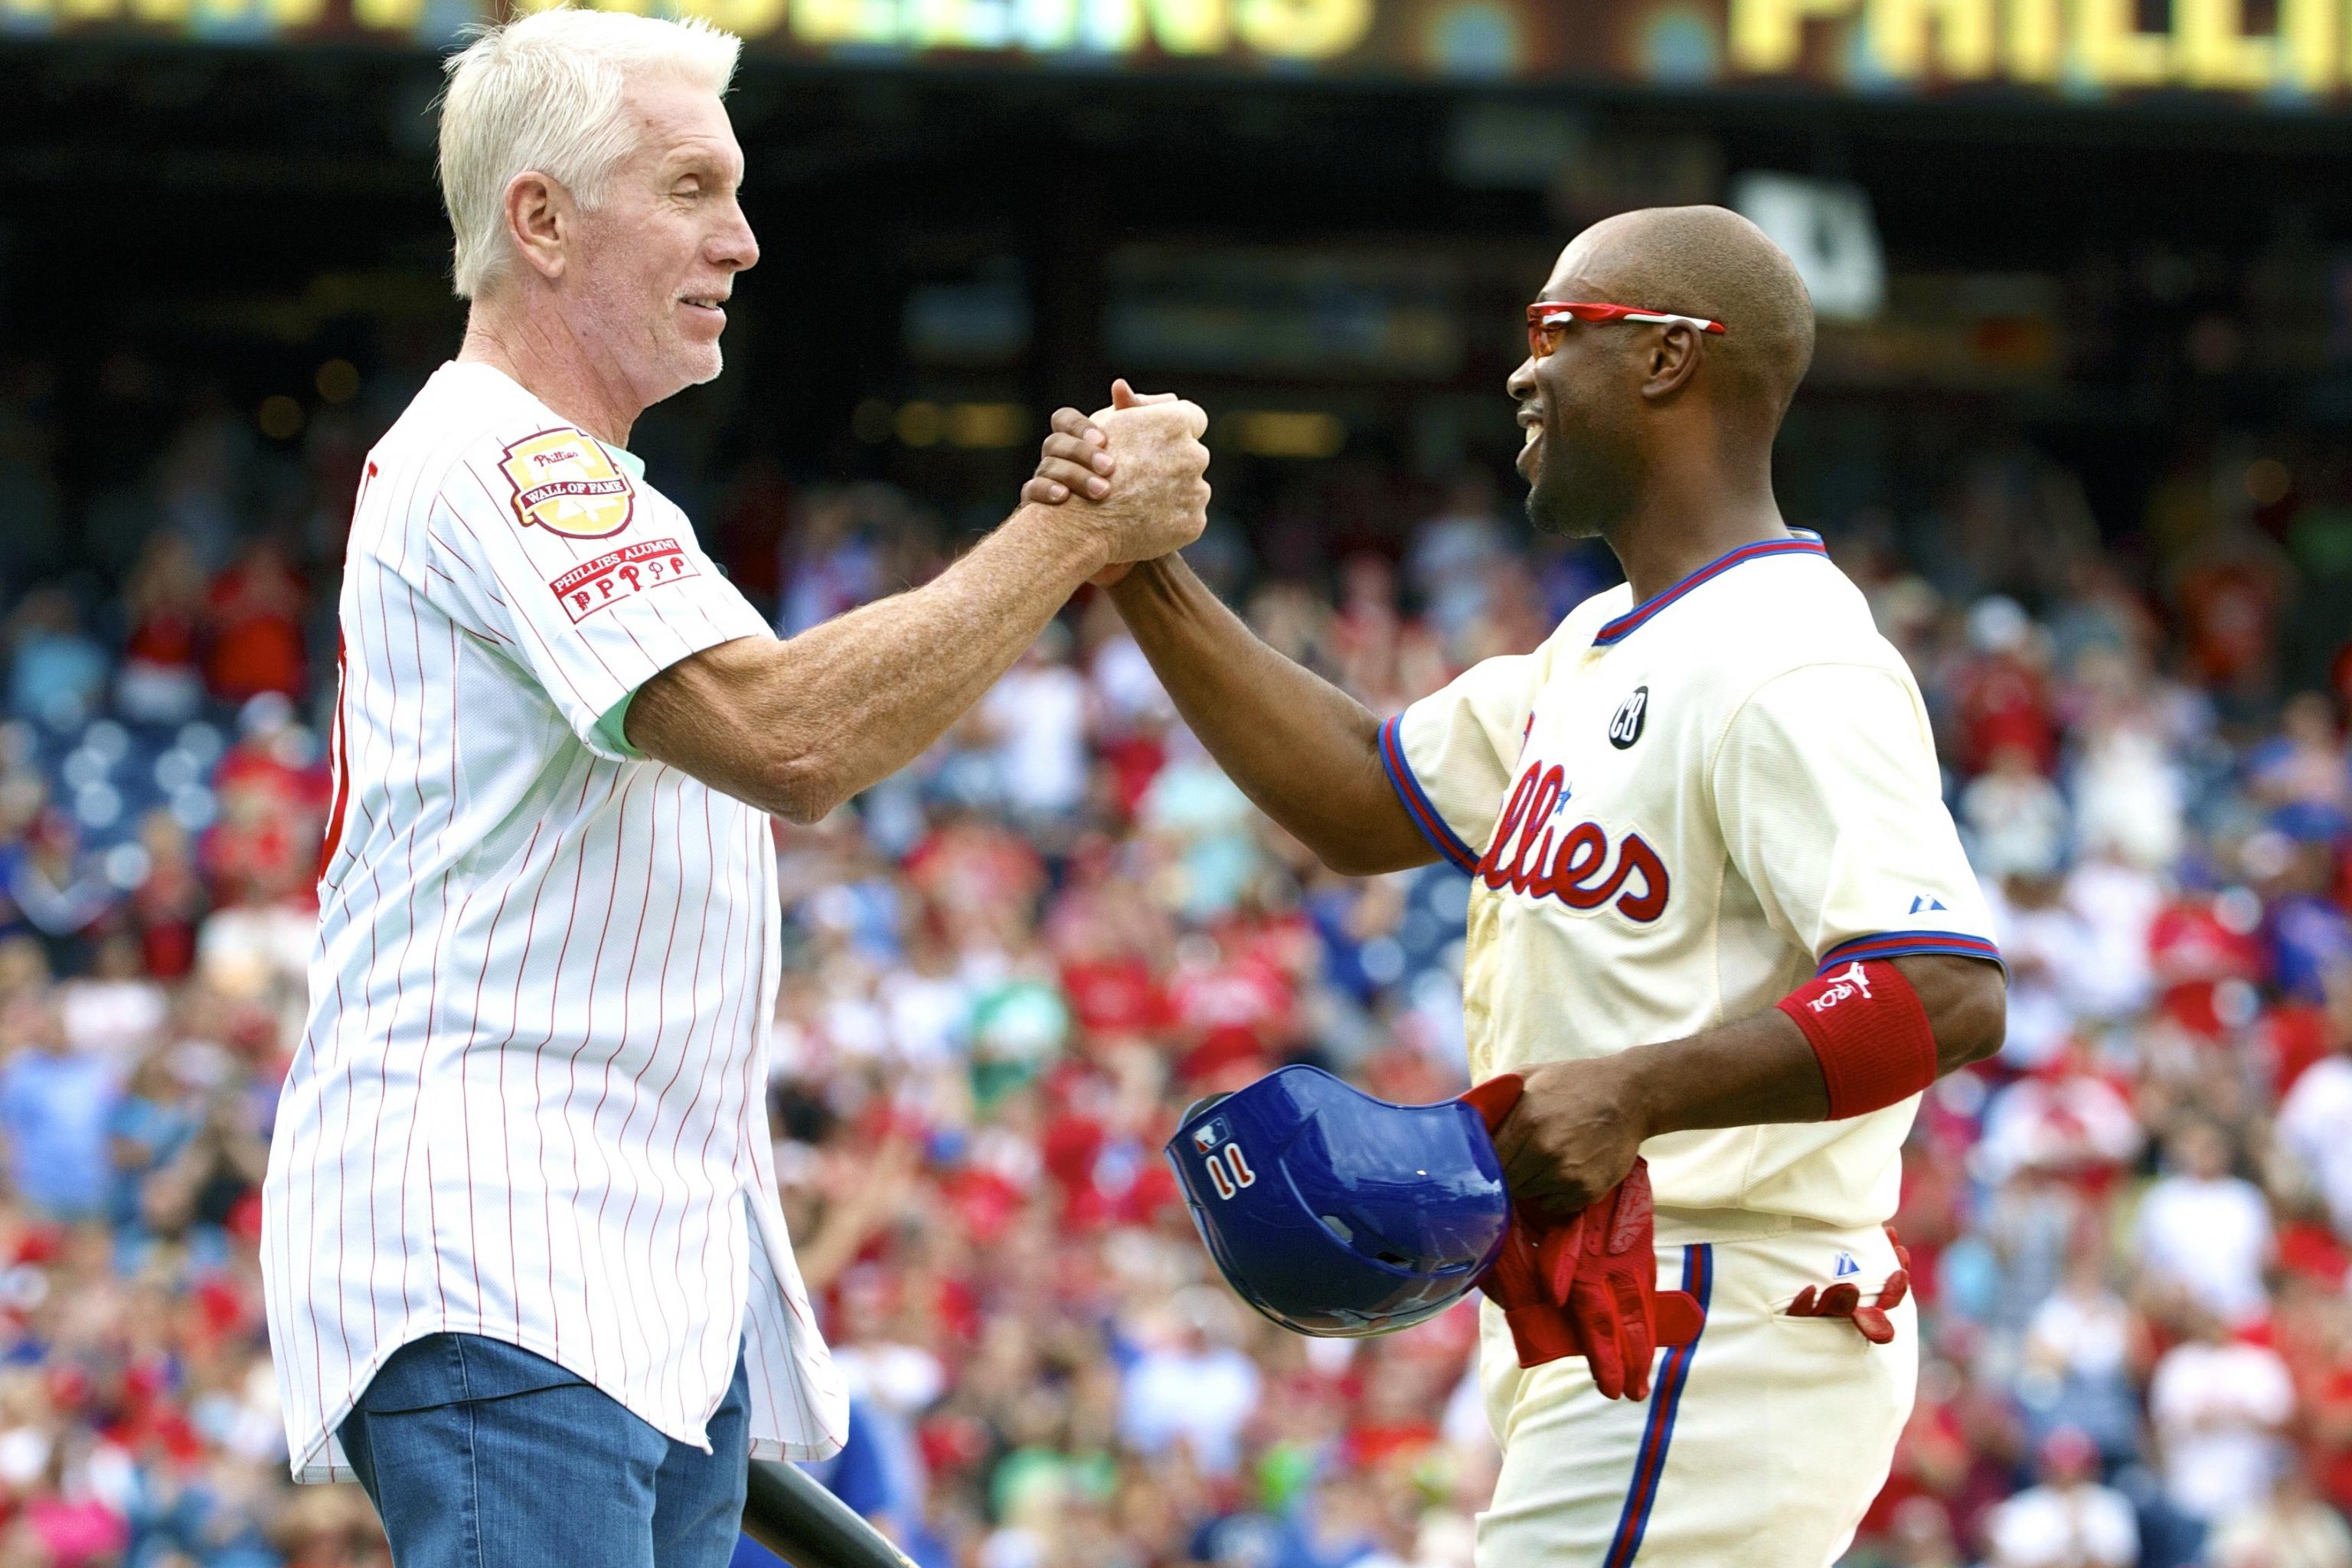 Jimmy Rollins hopes to make a hit with health